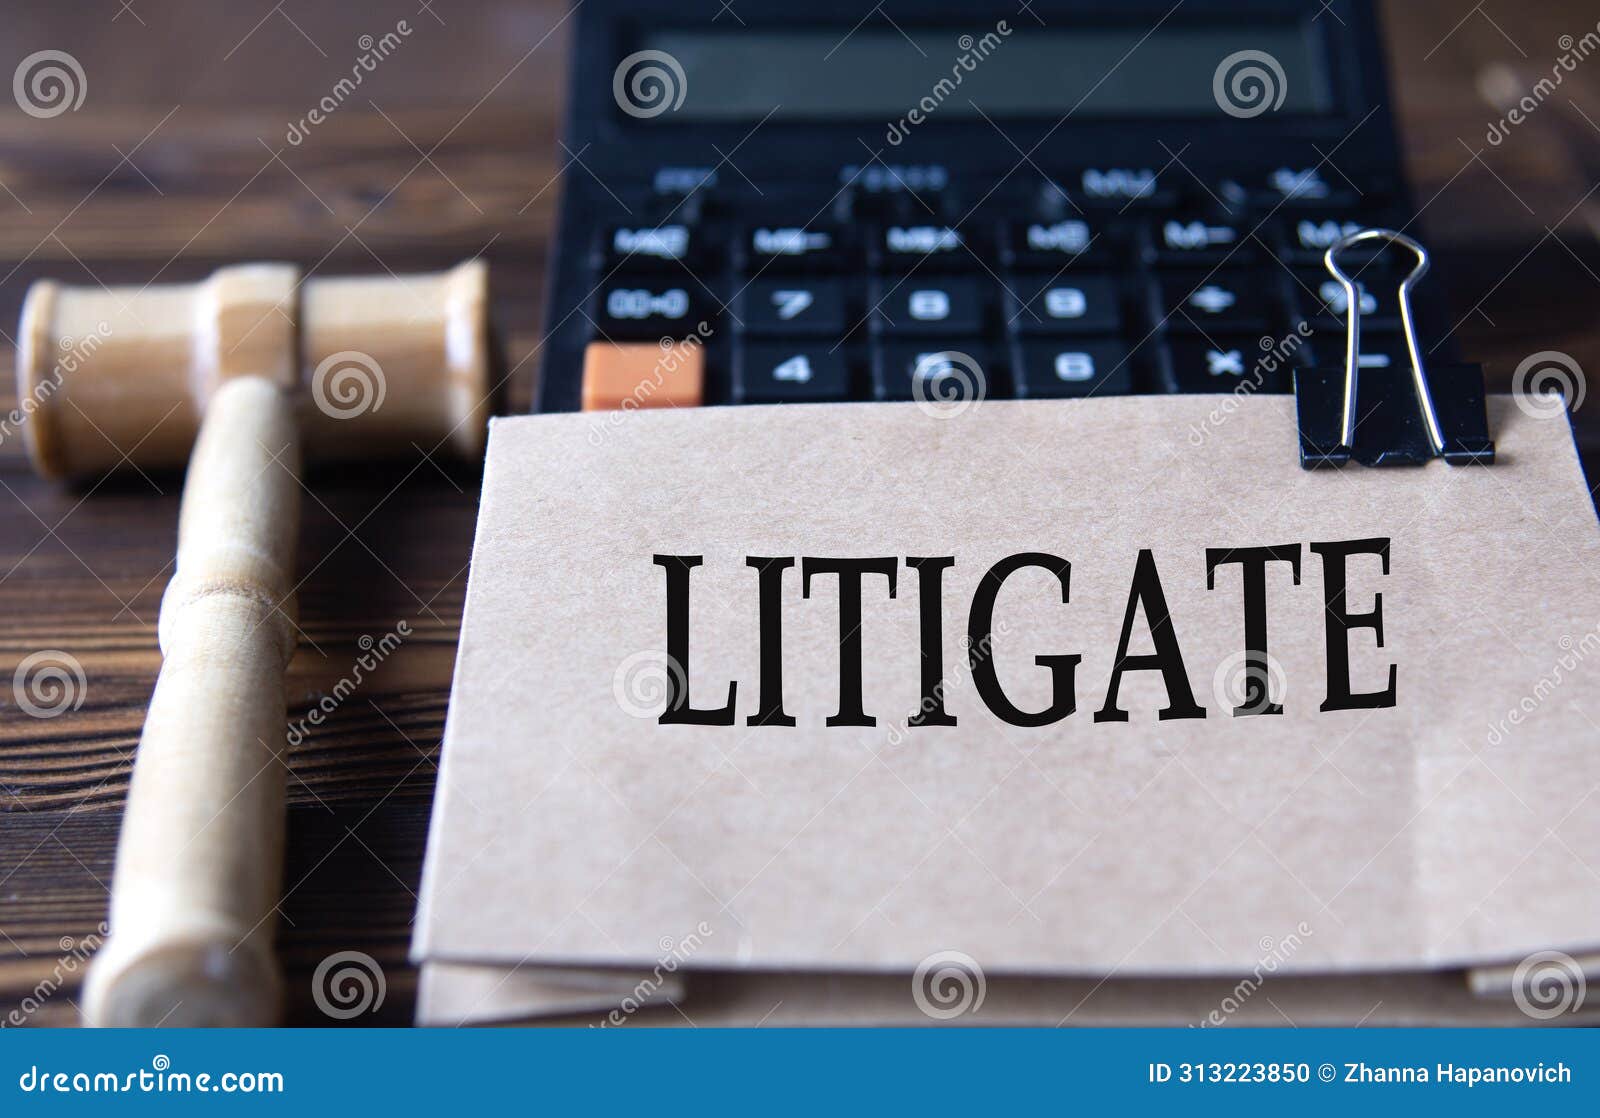 litigate - word on light brown paper against the background of a calculator and a judge's gavel